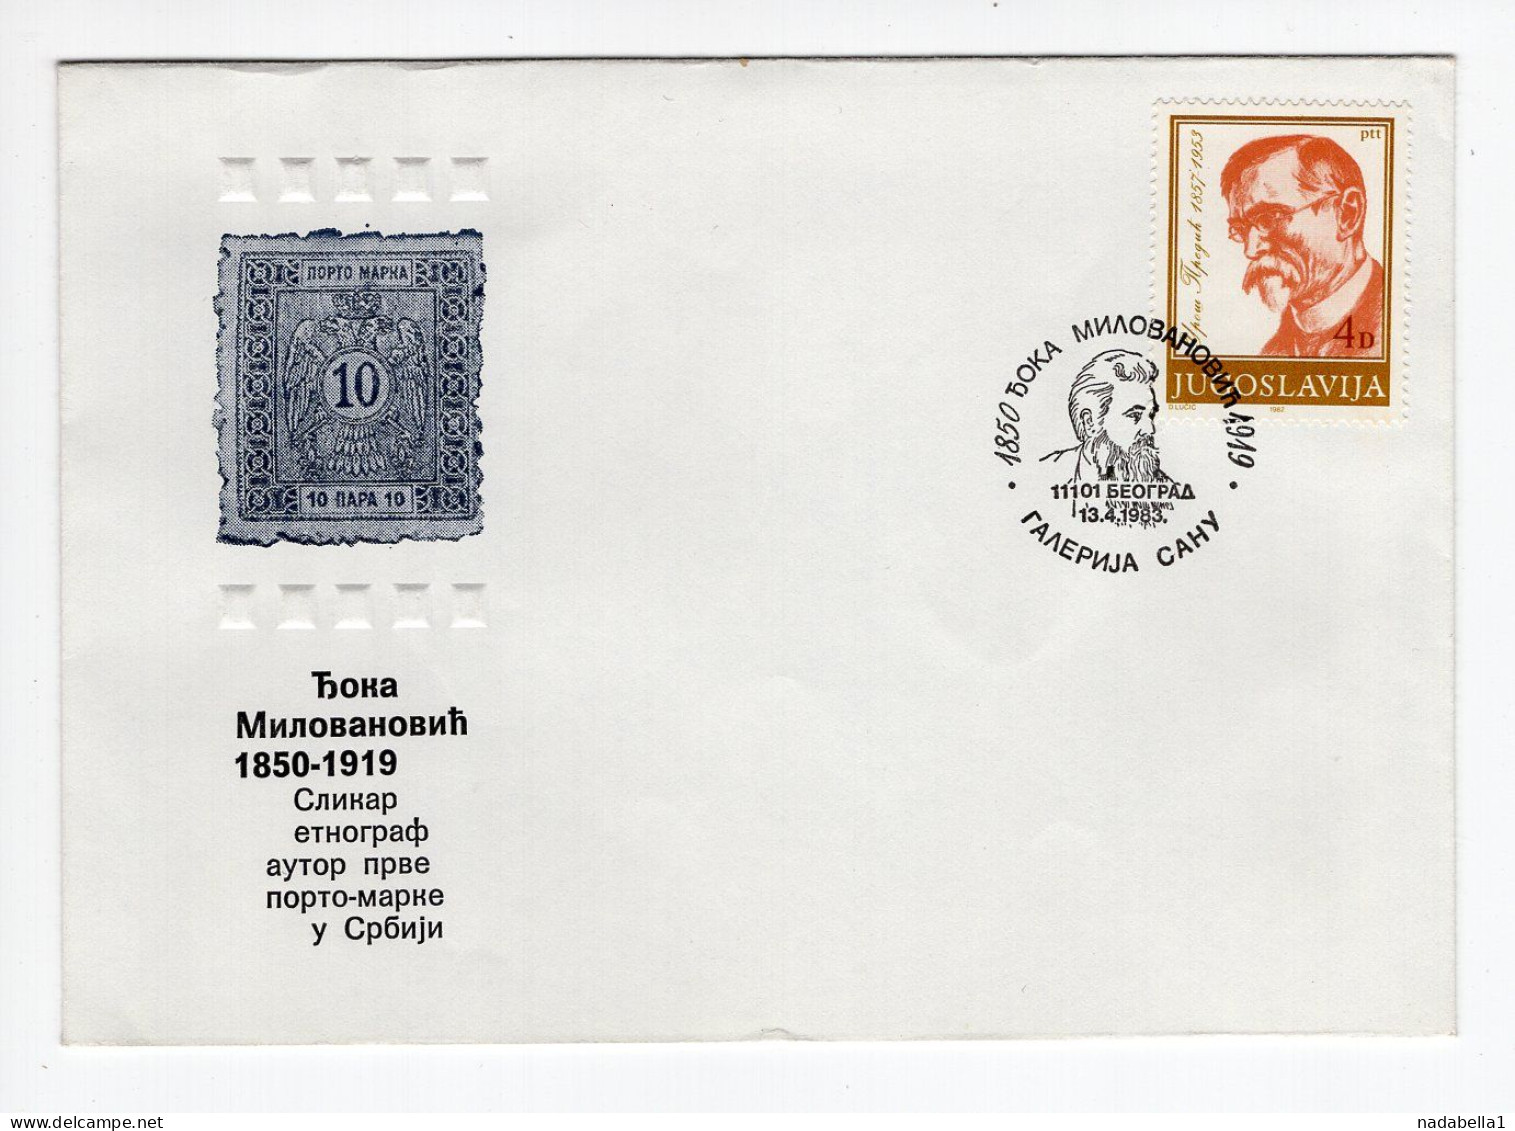 1983. YUGOSLAVIA,SERBIA,BELGRADE,FDC DJOKA MILOVANOVIC,THE AUTHOR OF THE FIRST PORT,POSTAGE DUE STAMP IN SERBIA - FDC